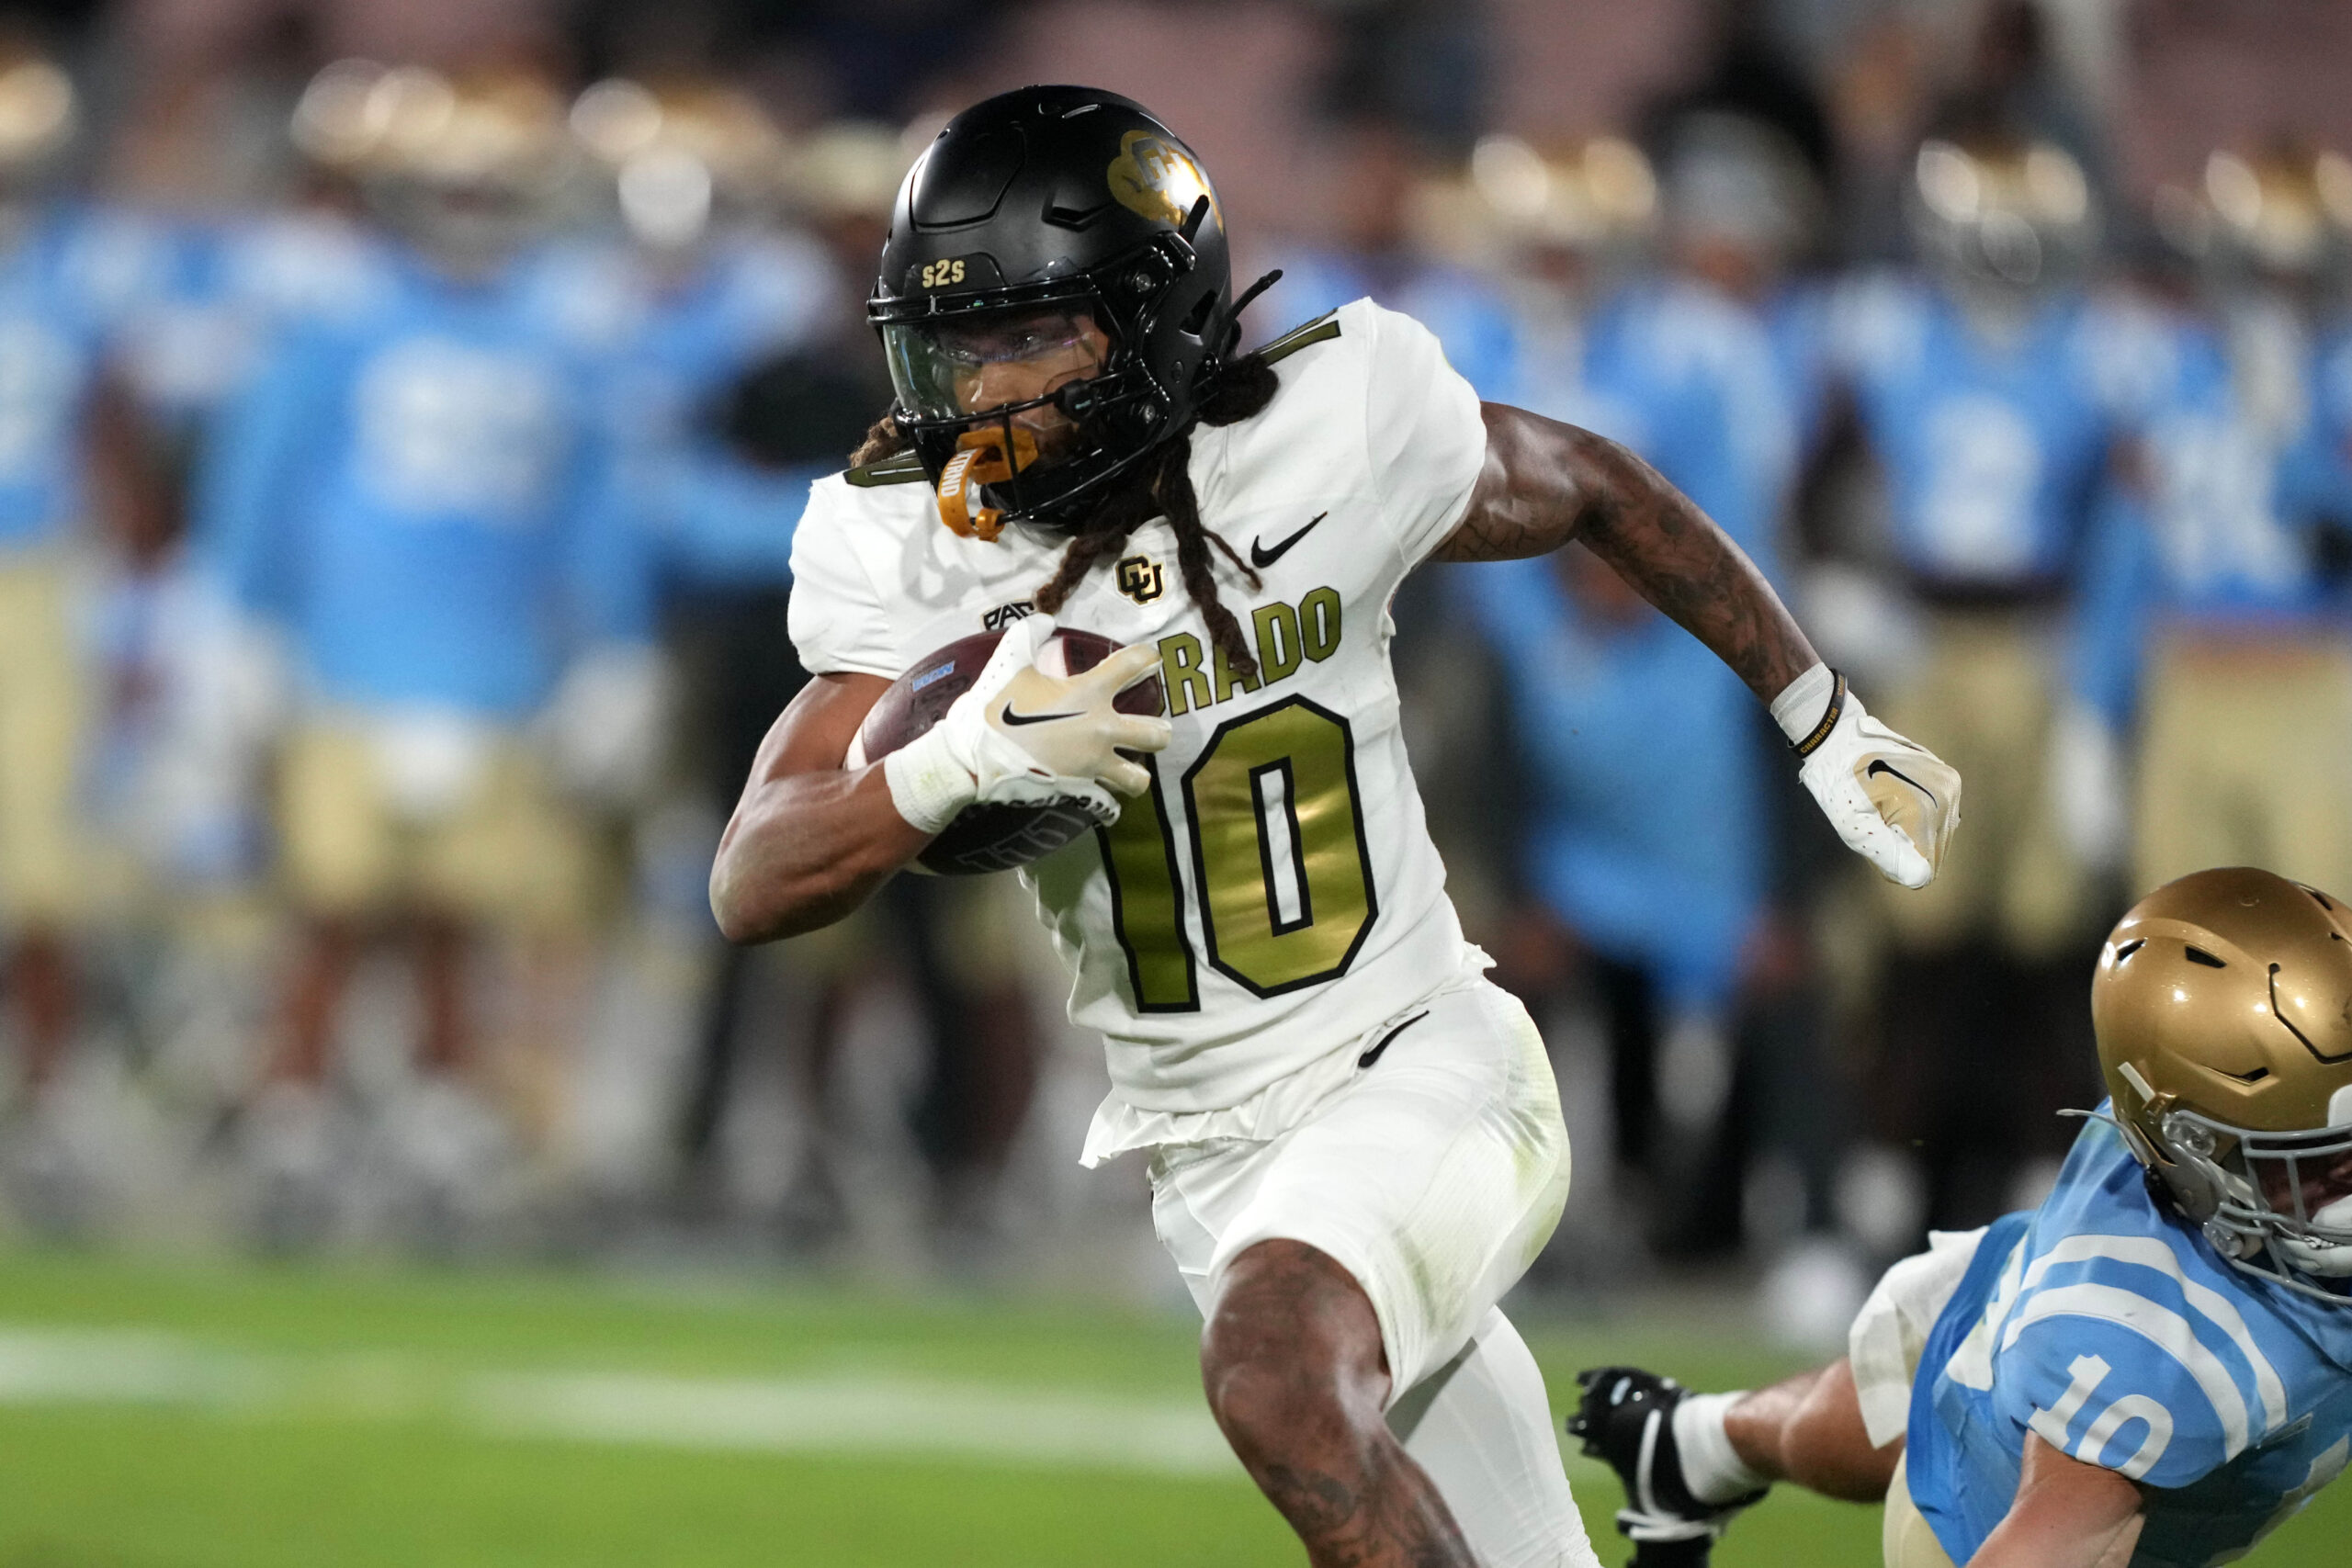 Colorado Buffaloes wide receiver Xavier Weaver (10) carries the ball against the UCLA Bruins in the second half at Rose Bowl.